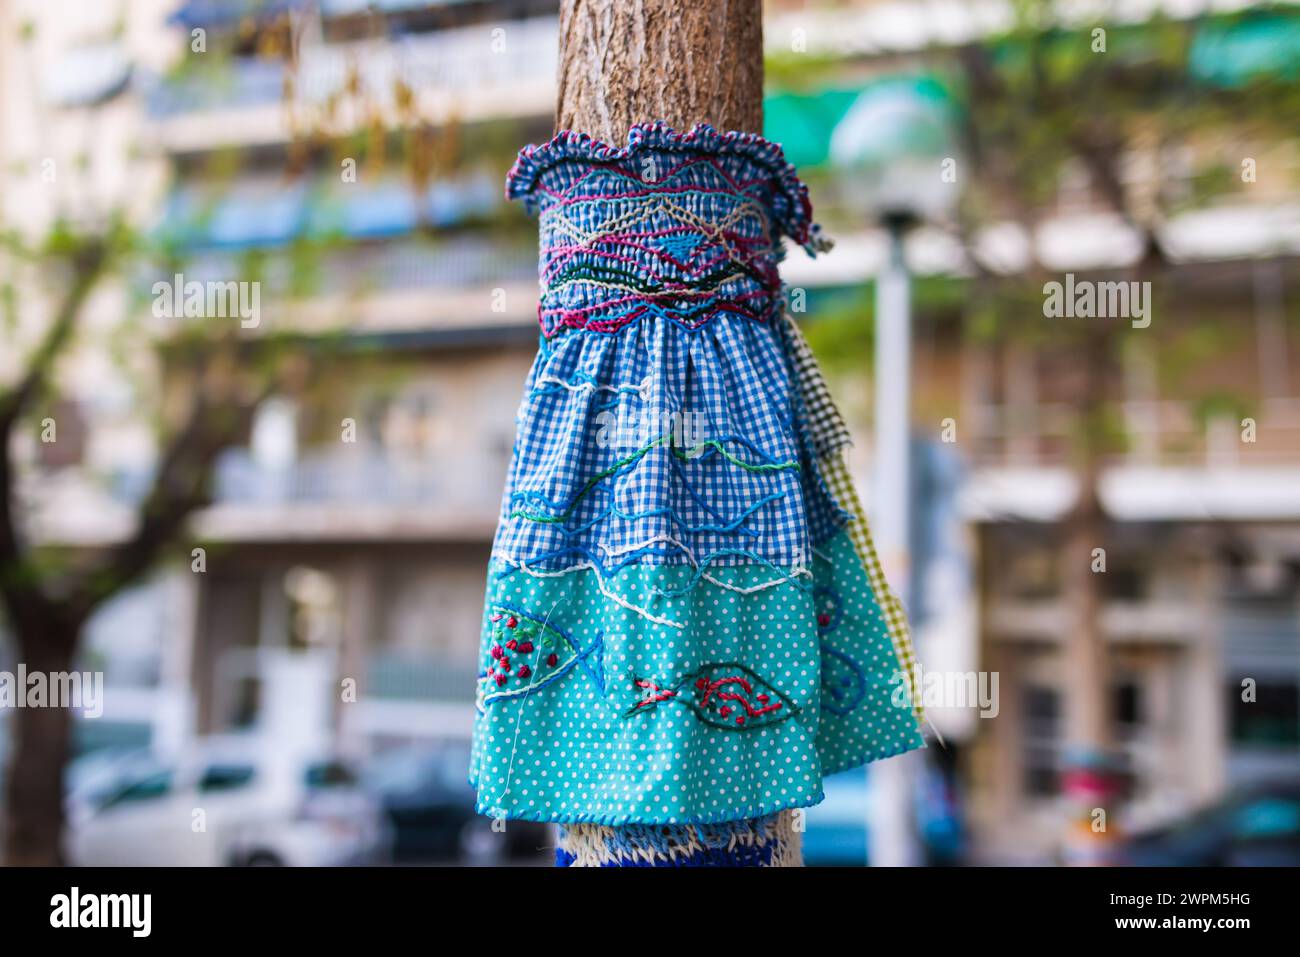 Yarnbombing, trees decorated with yarn bombing, knitted graffiti street art, kniffiti in the european city, colored urban knitting, process of graffit Stock Photo